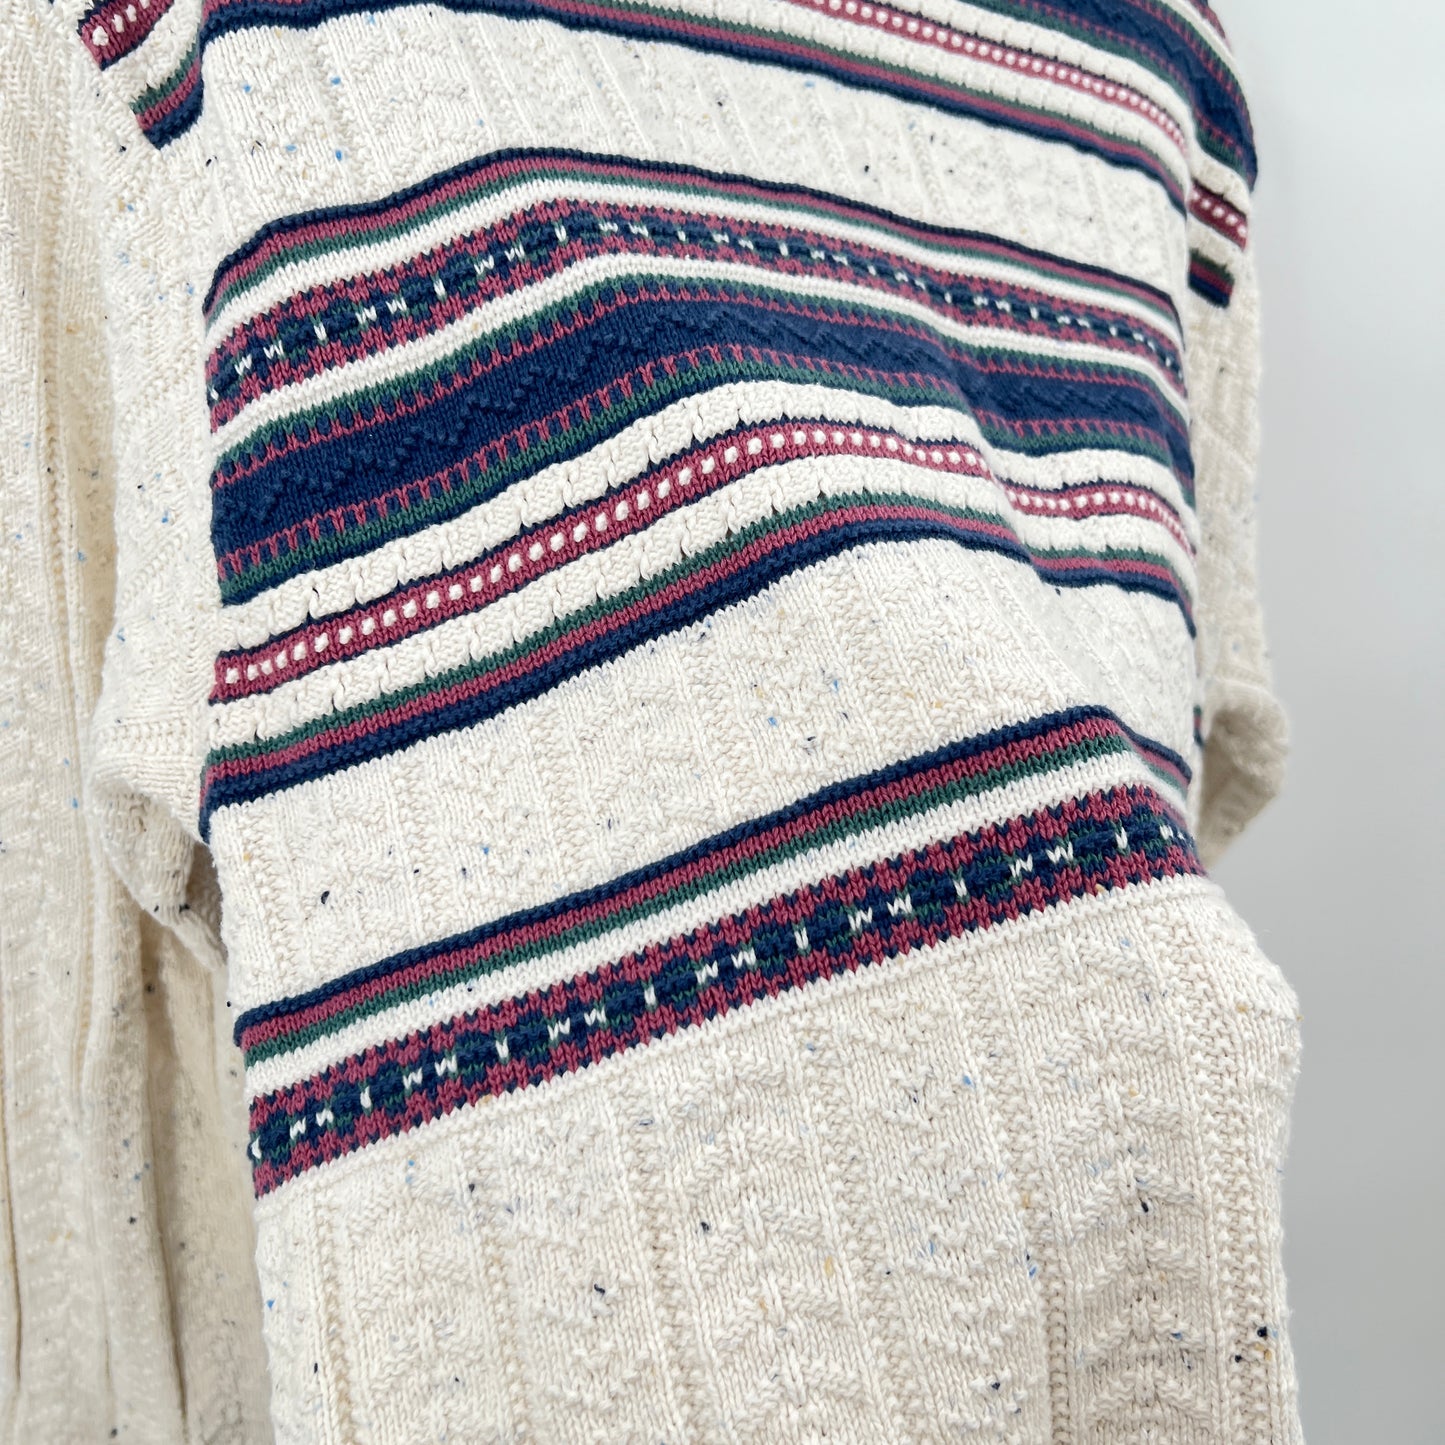 SOLD. Vintage Northern Reflections Cotton Cardigan L